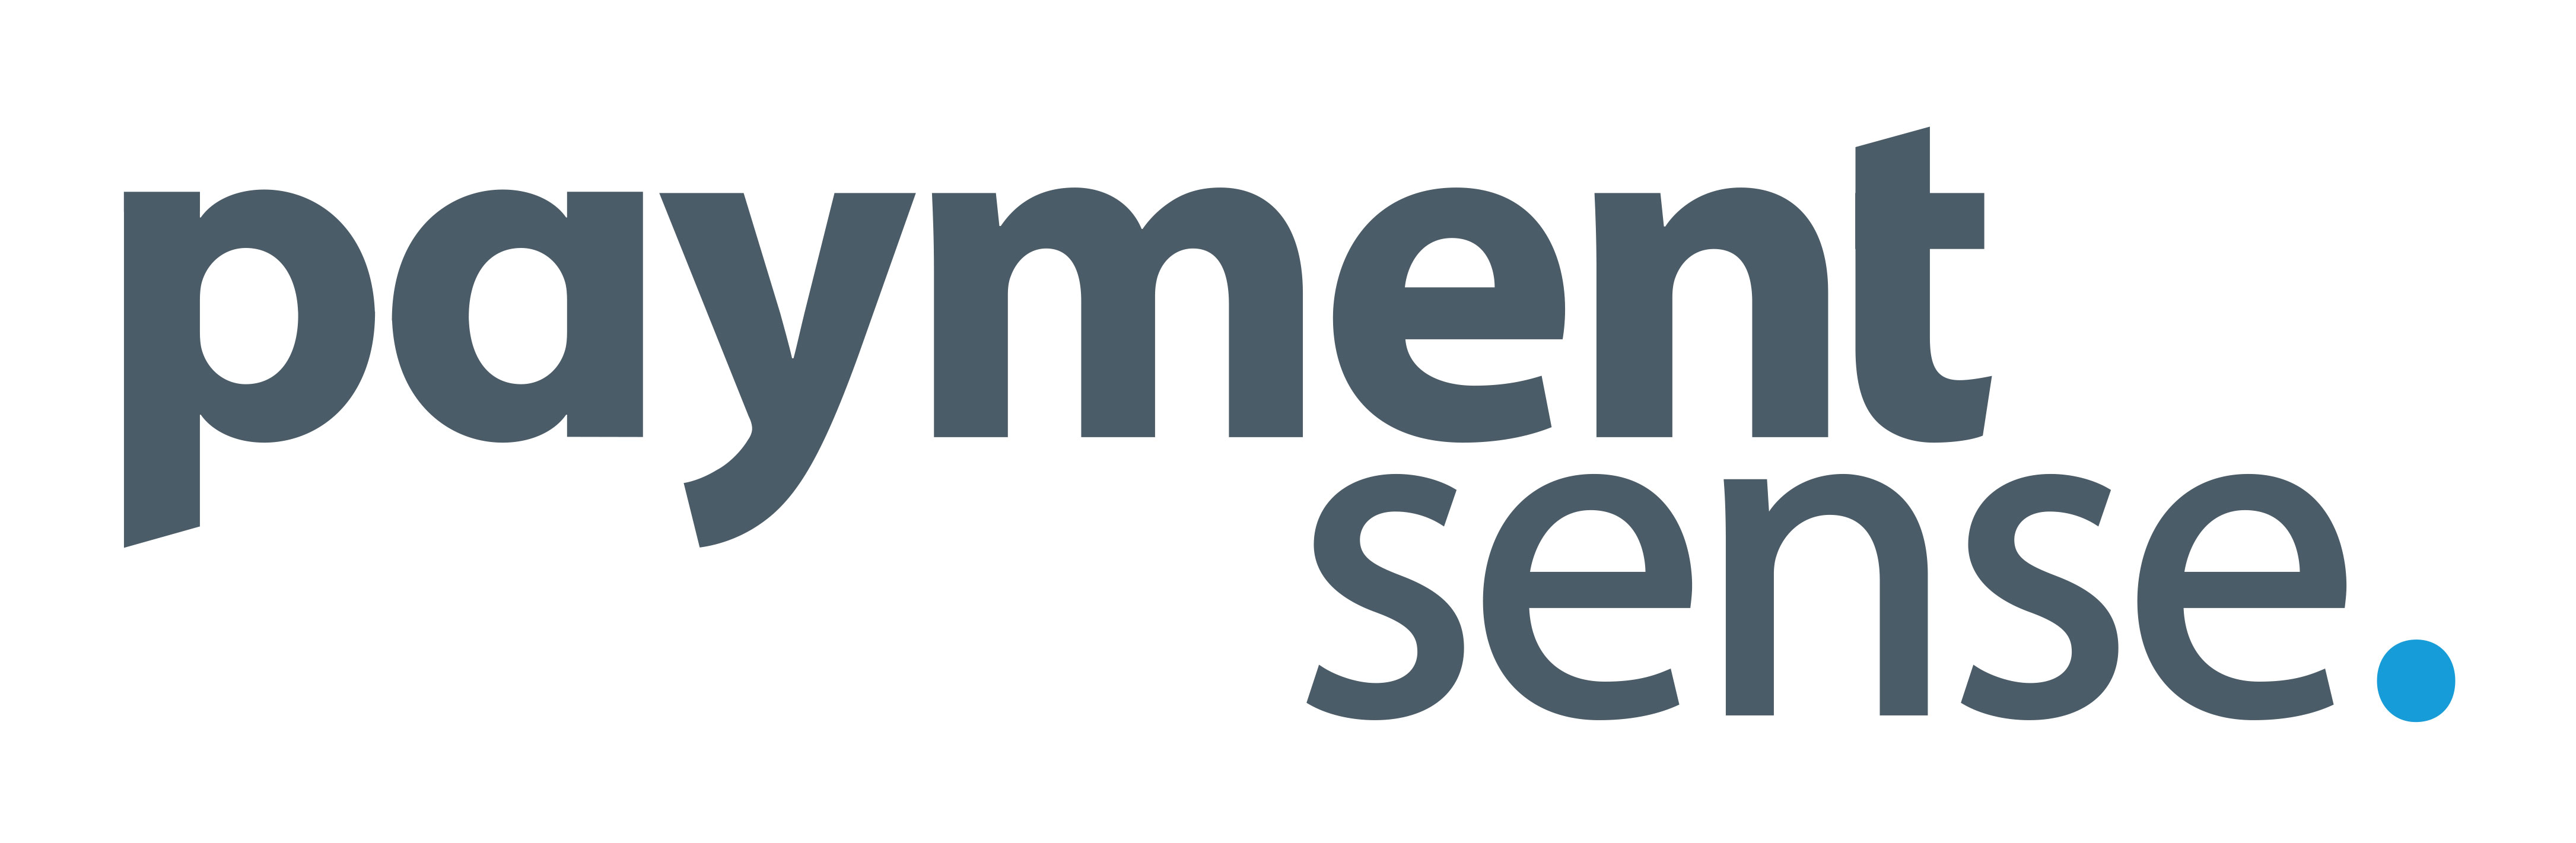 Paymentsense ranked 70th in The Sunday Times Hiscox Tech Track 100